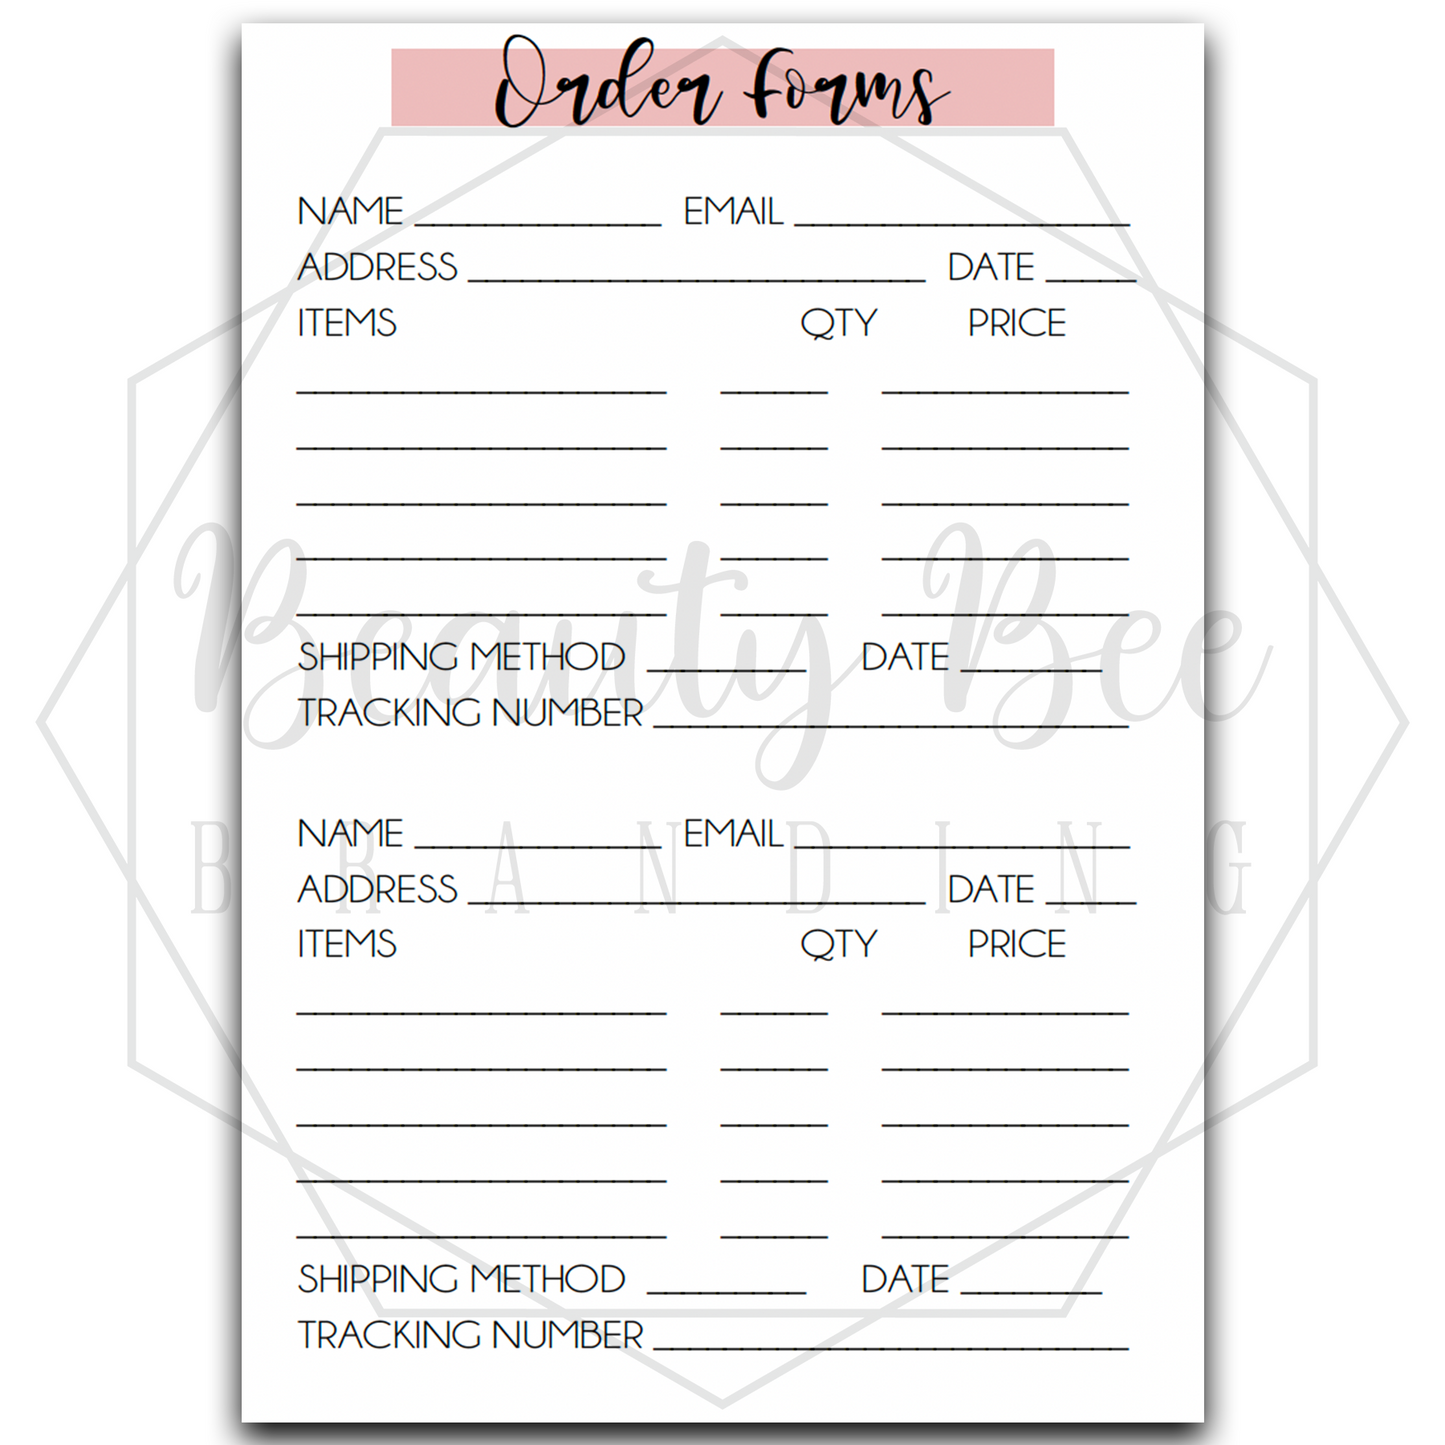 Planner Inserts - Order Forms